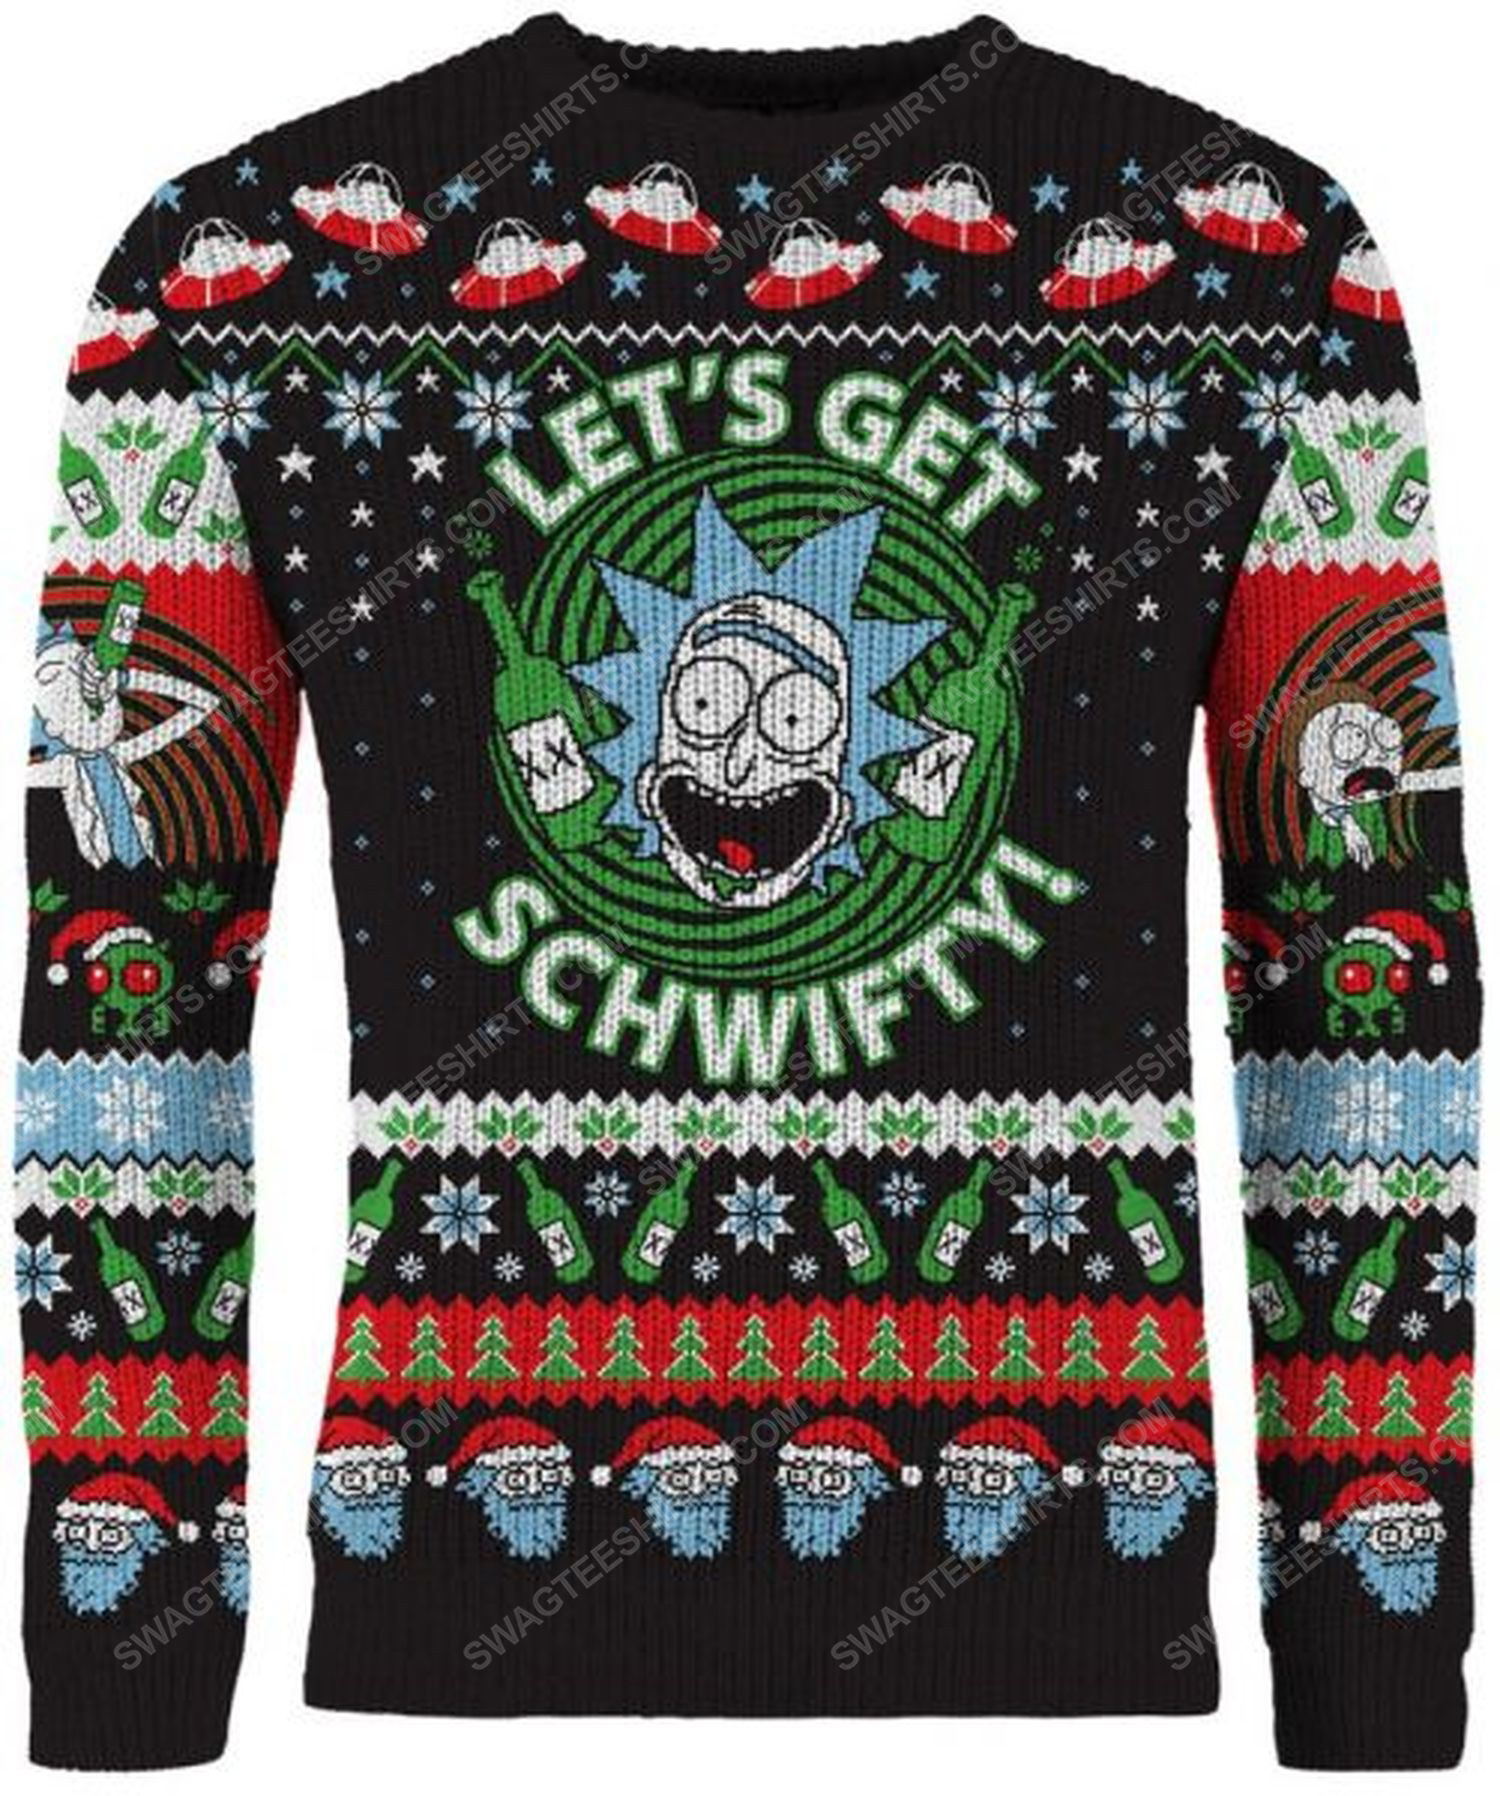 Rick and morty let's get schwifty full print ugly christmas sweater 2 - Copy (2)